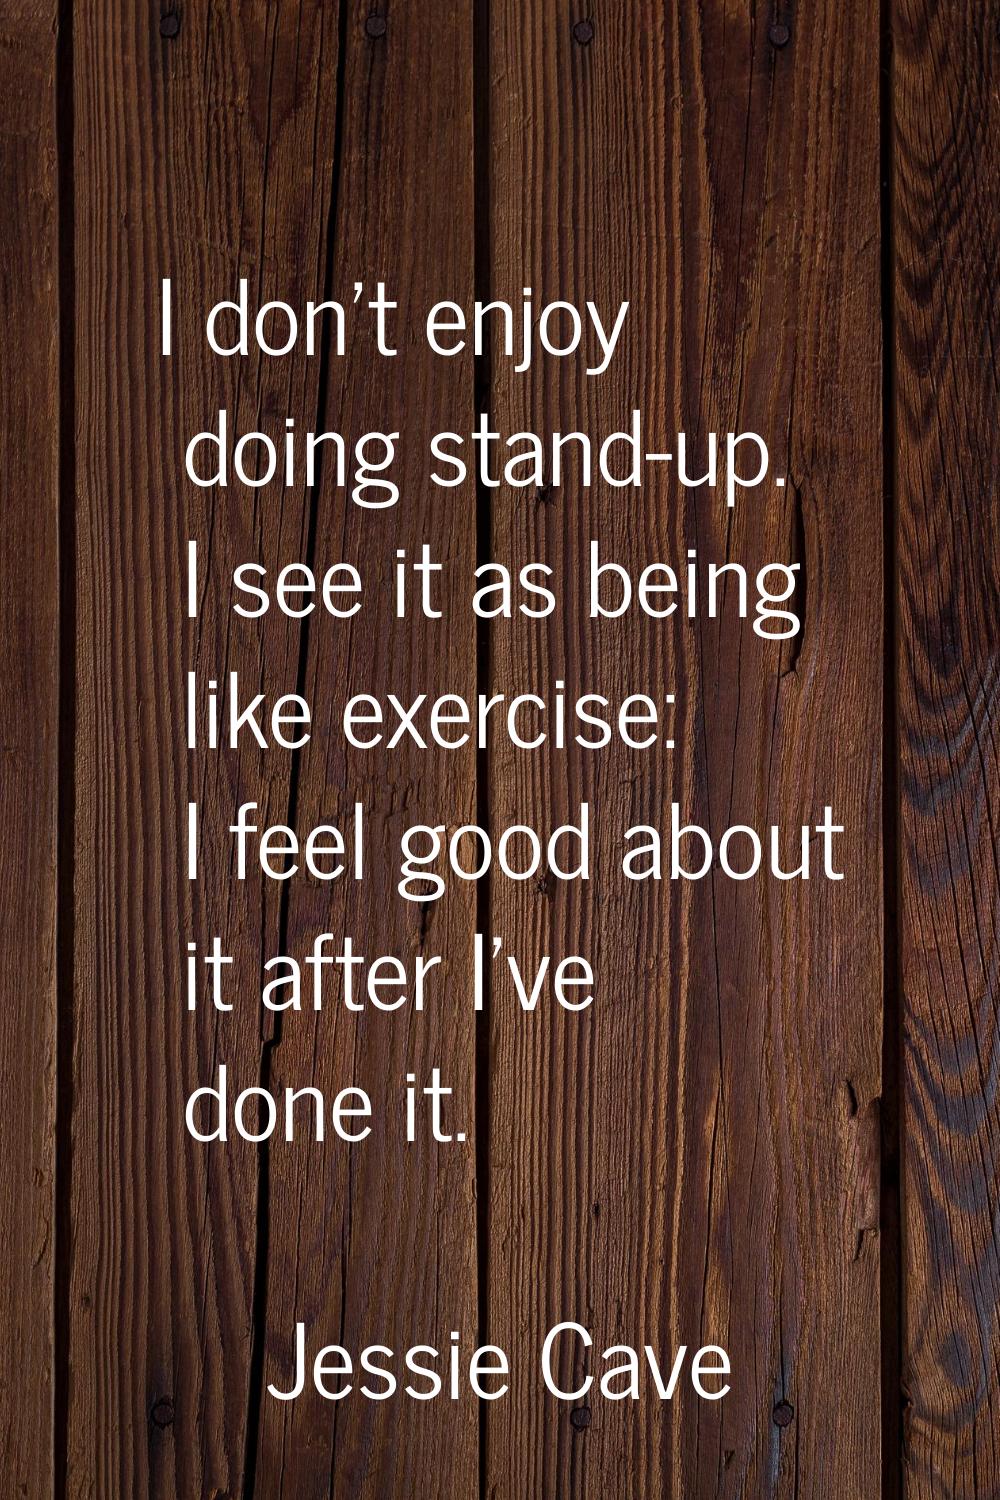 I don't enjoy doing stand-up. I see it as being like exercise: I feel good about it after I've done